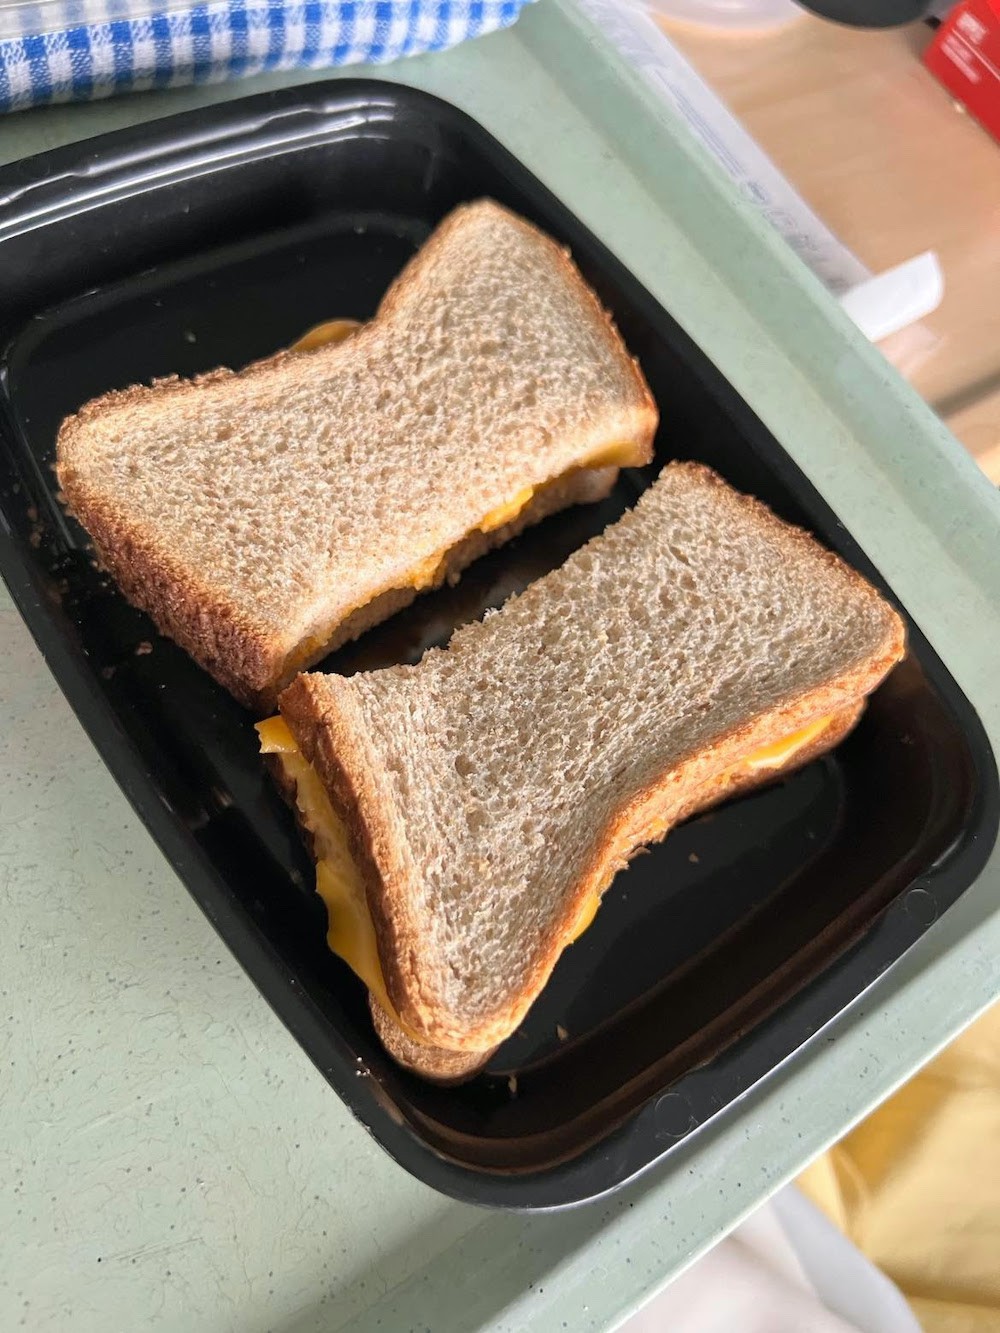 A photo of a cheese sandwich. The bread is plain and untoasted, and there is unmelted cheese visible between the two slices of bread. It is in a disposable black plastic container.